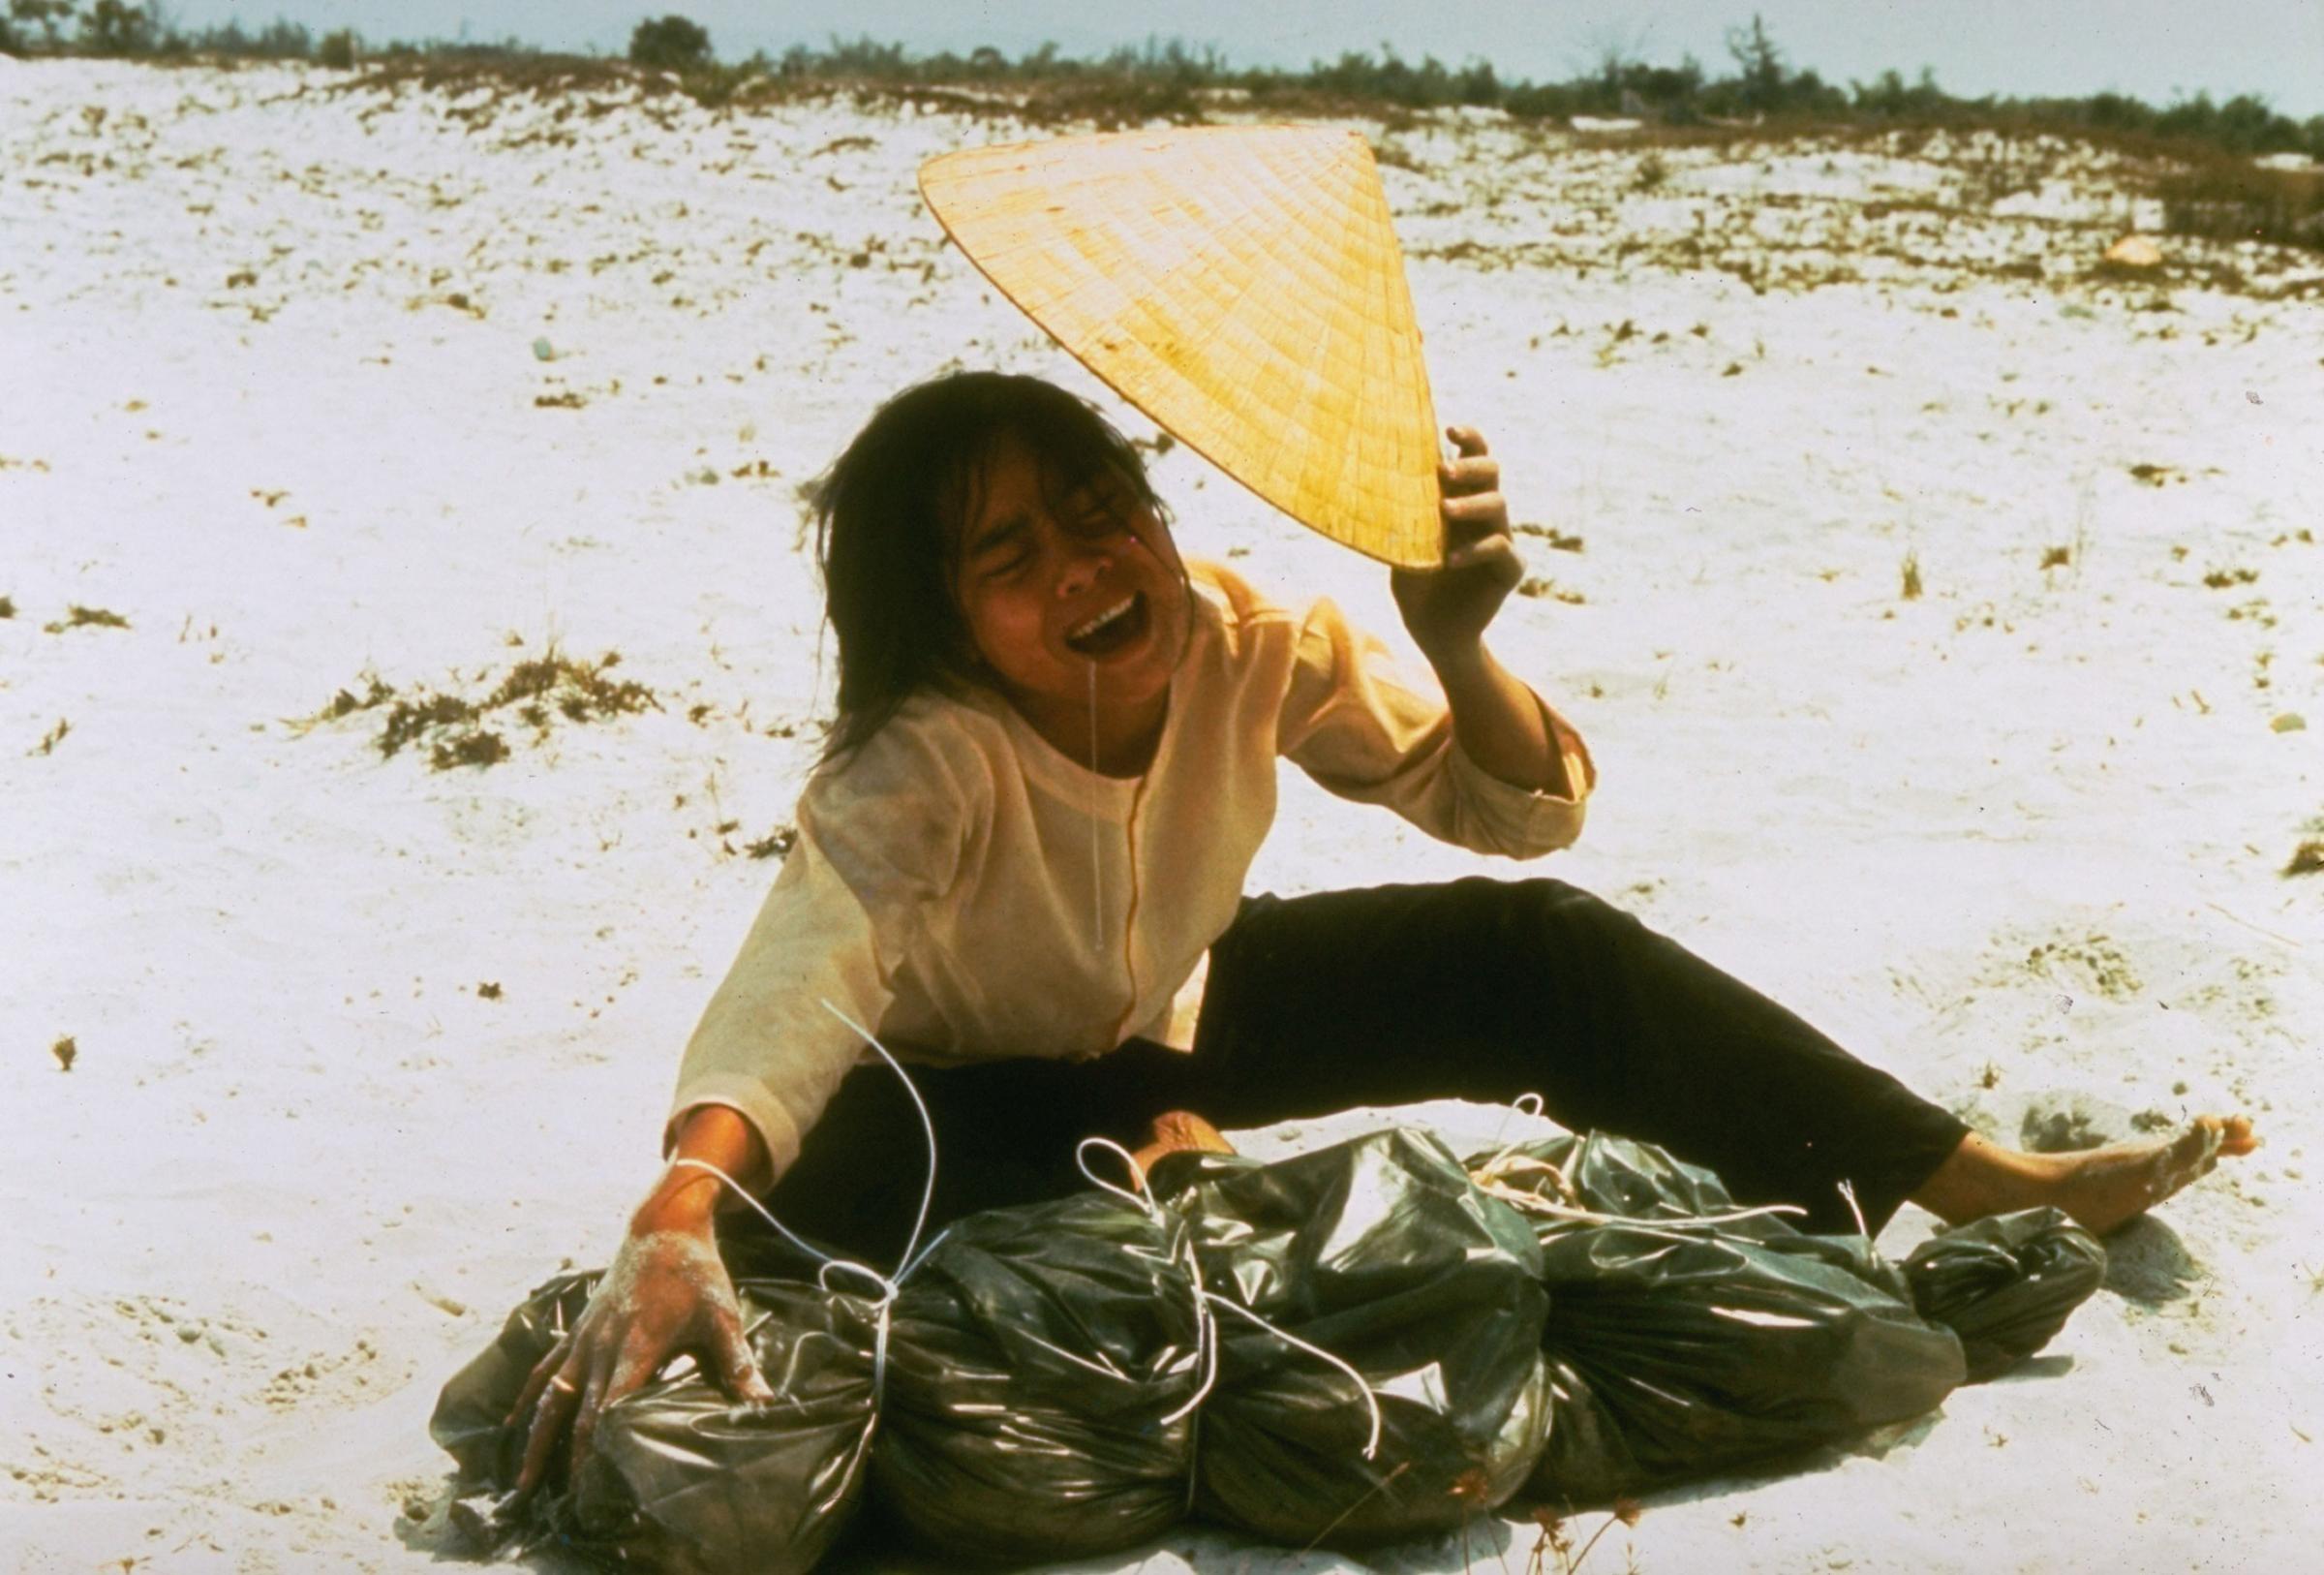 A grieving widow cries over a plastic bag containing remains of her husband which were found in mass grave. He was killed in Feb. 1968 during the Tet offensive.